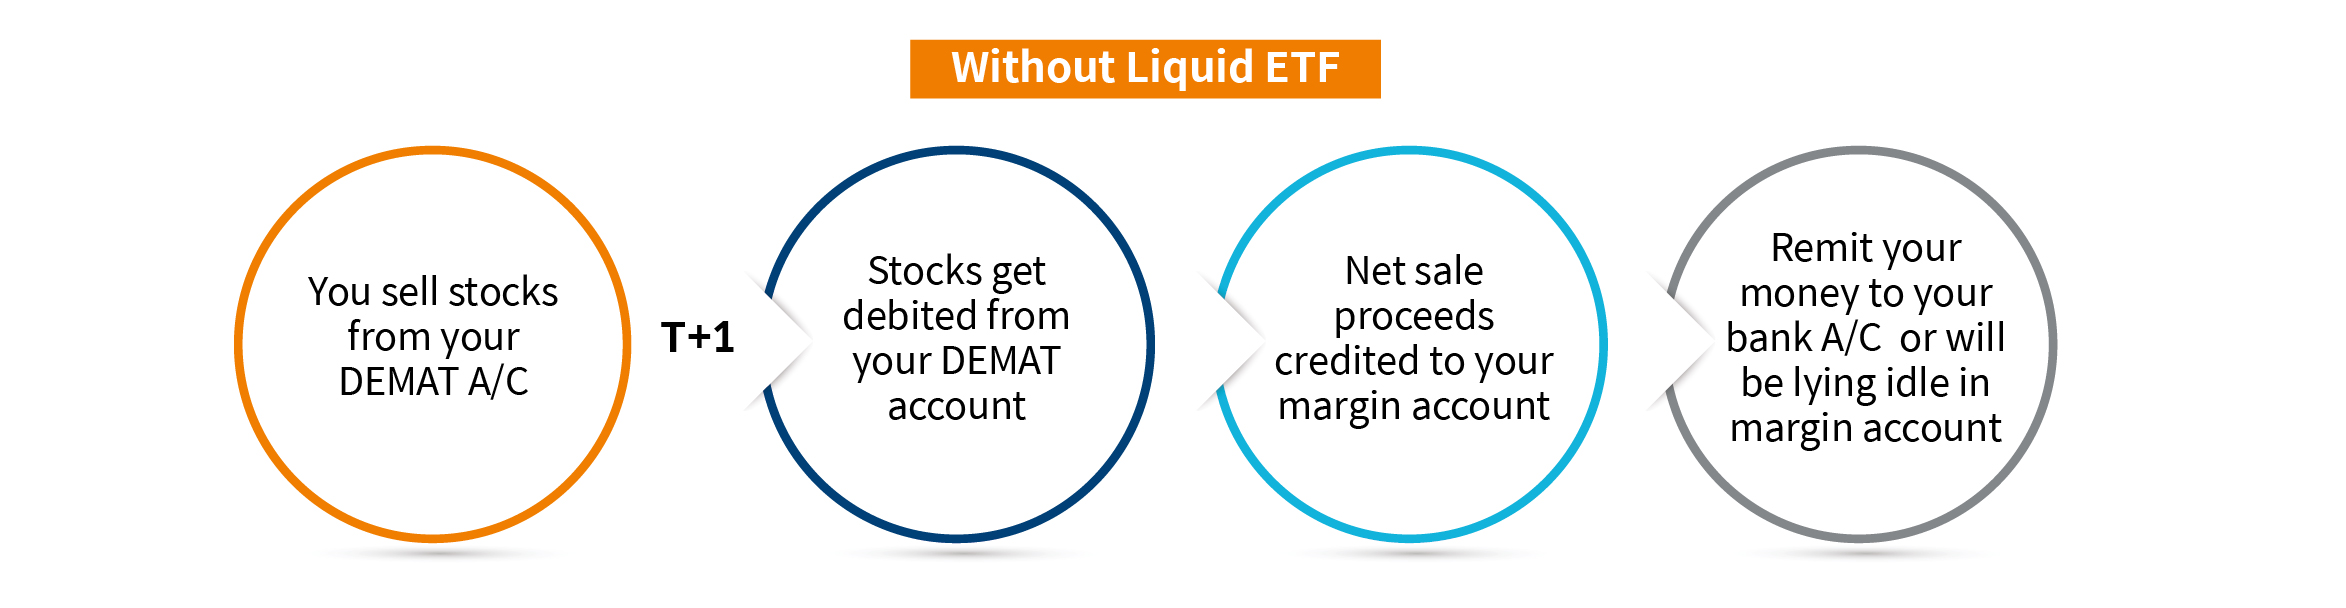 without Liquid ETF